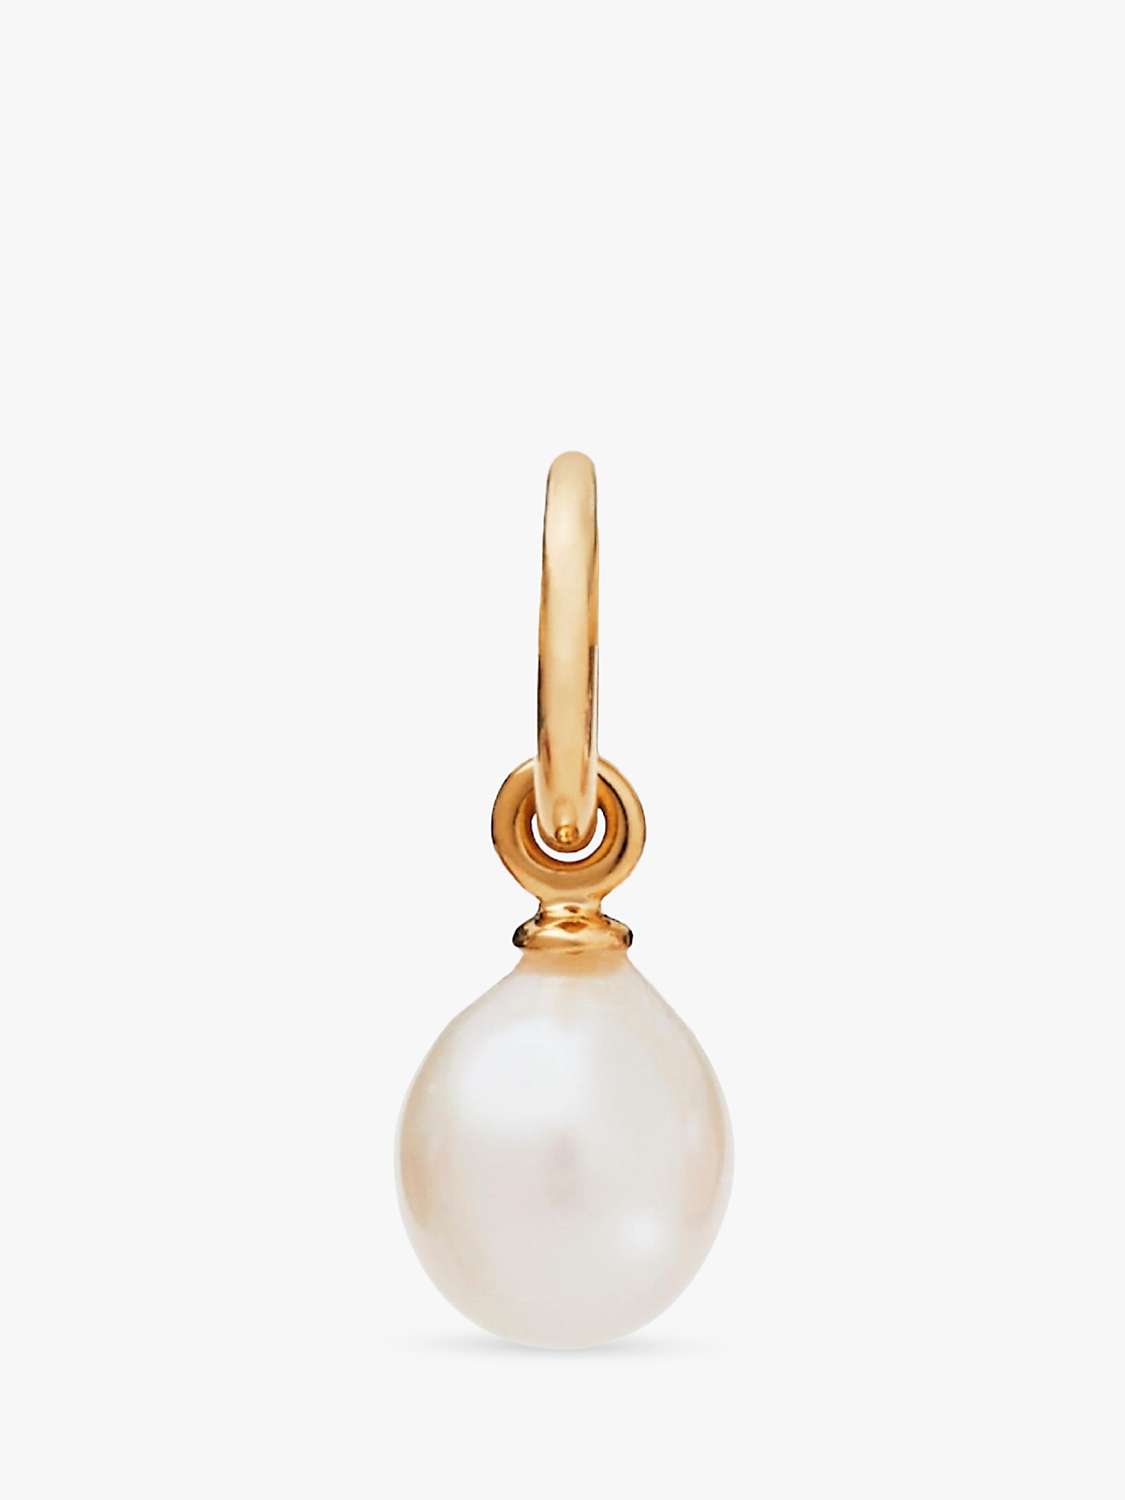 Buy Recognised Freedom Pearl Bobble Chain Pendant Necklace Online at johnlewis.com